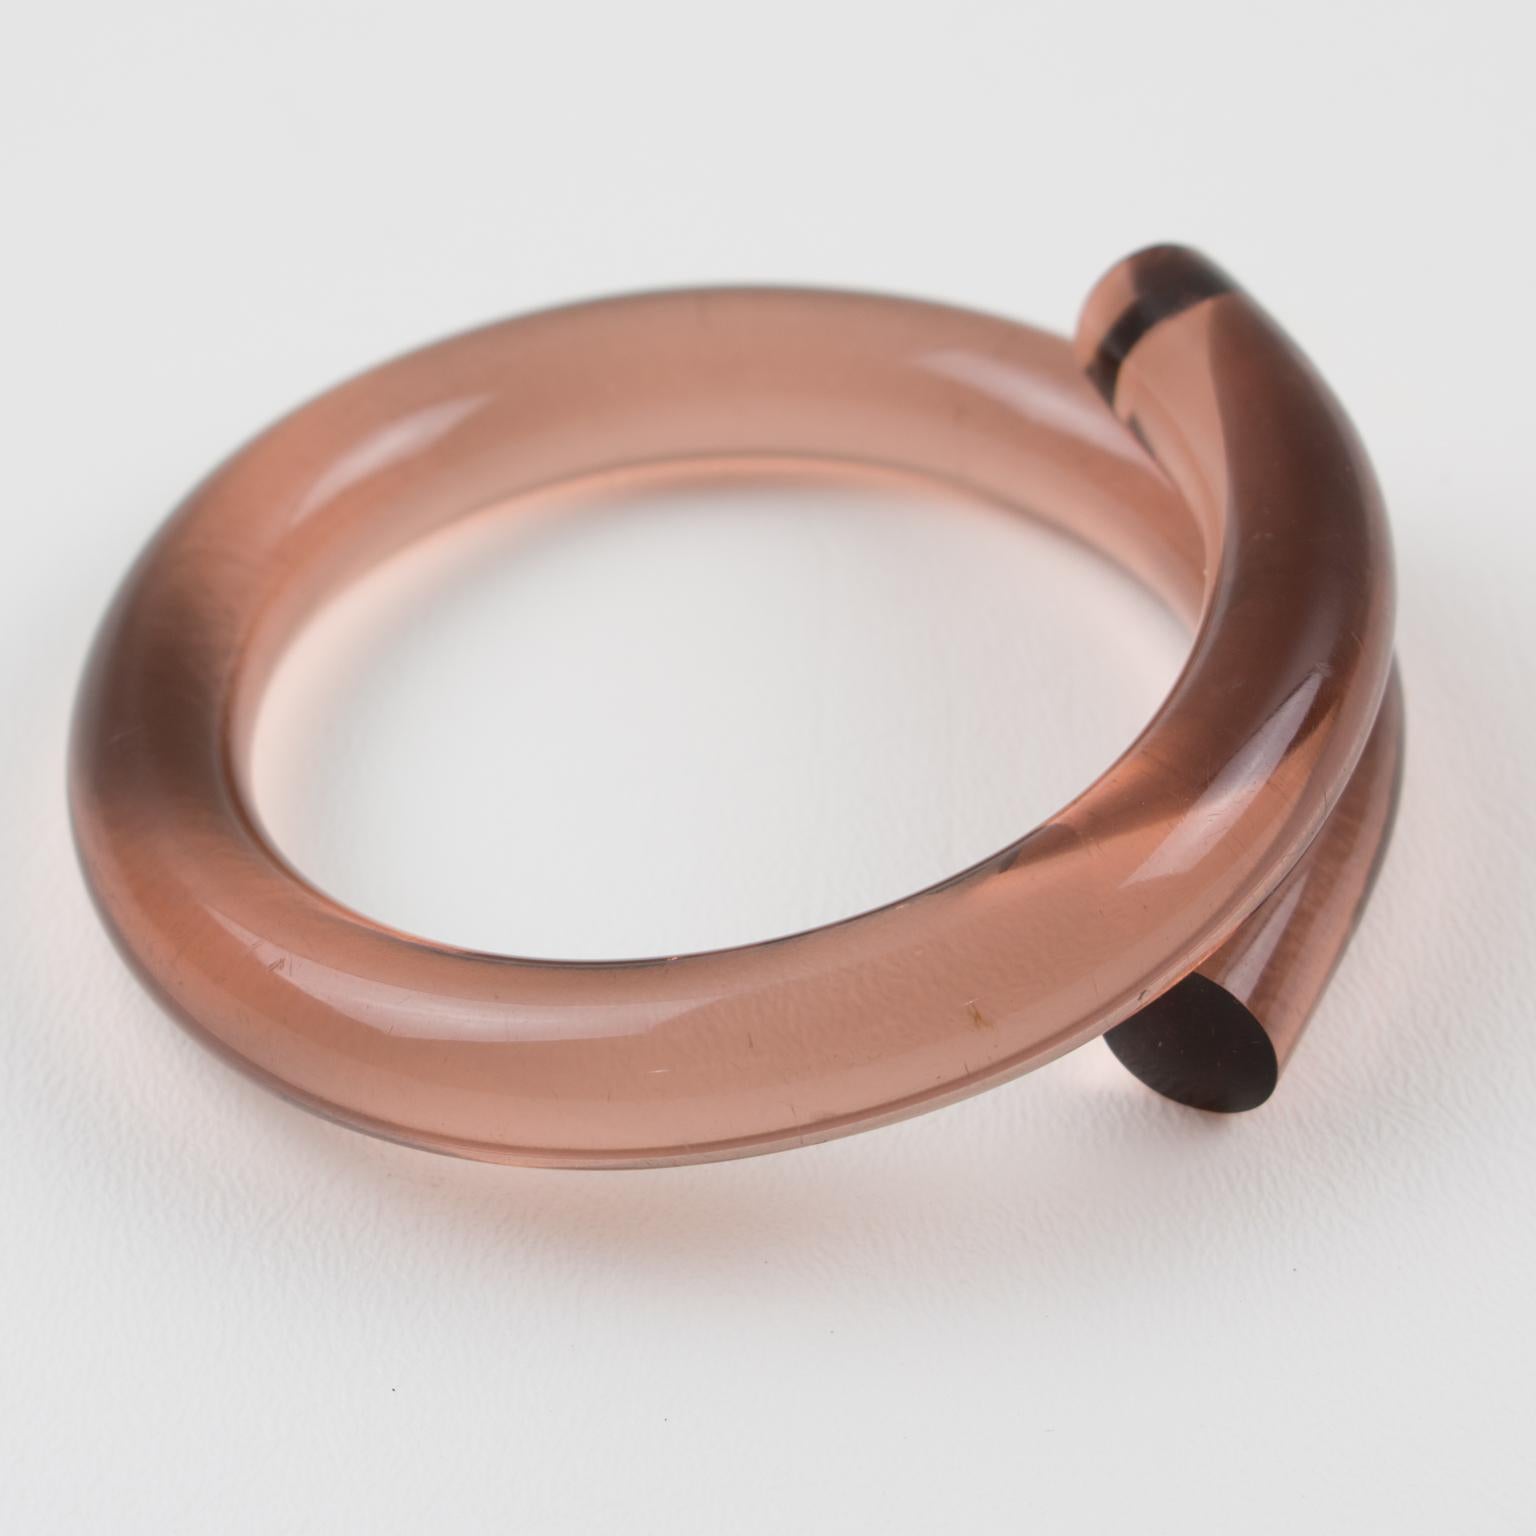 Transparent Copper Pink Lucite Coiled Bracelet Bangle In Excellent Condition For Sale In Atlanta, GA